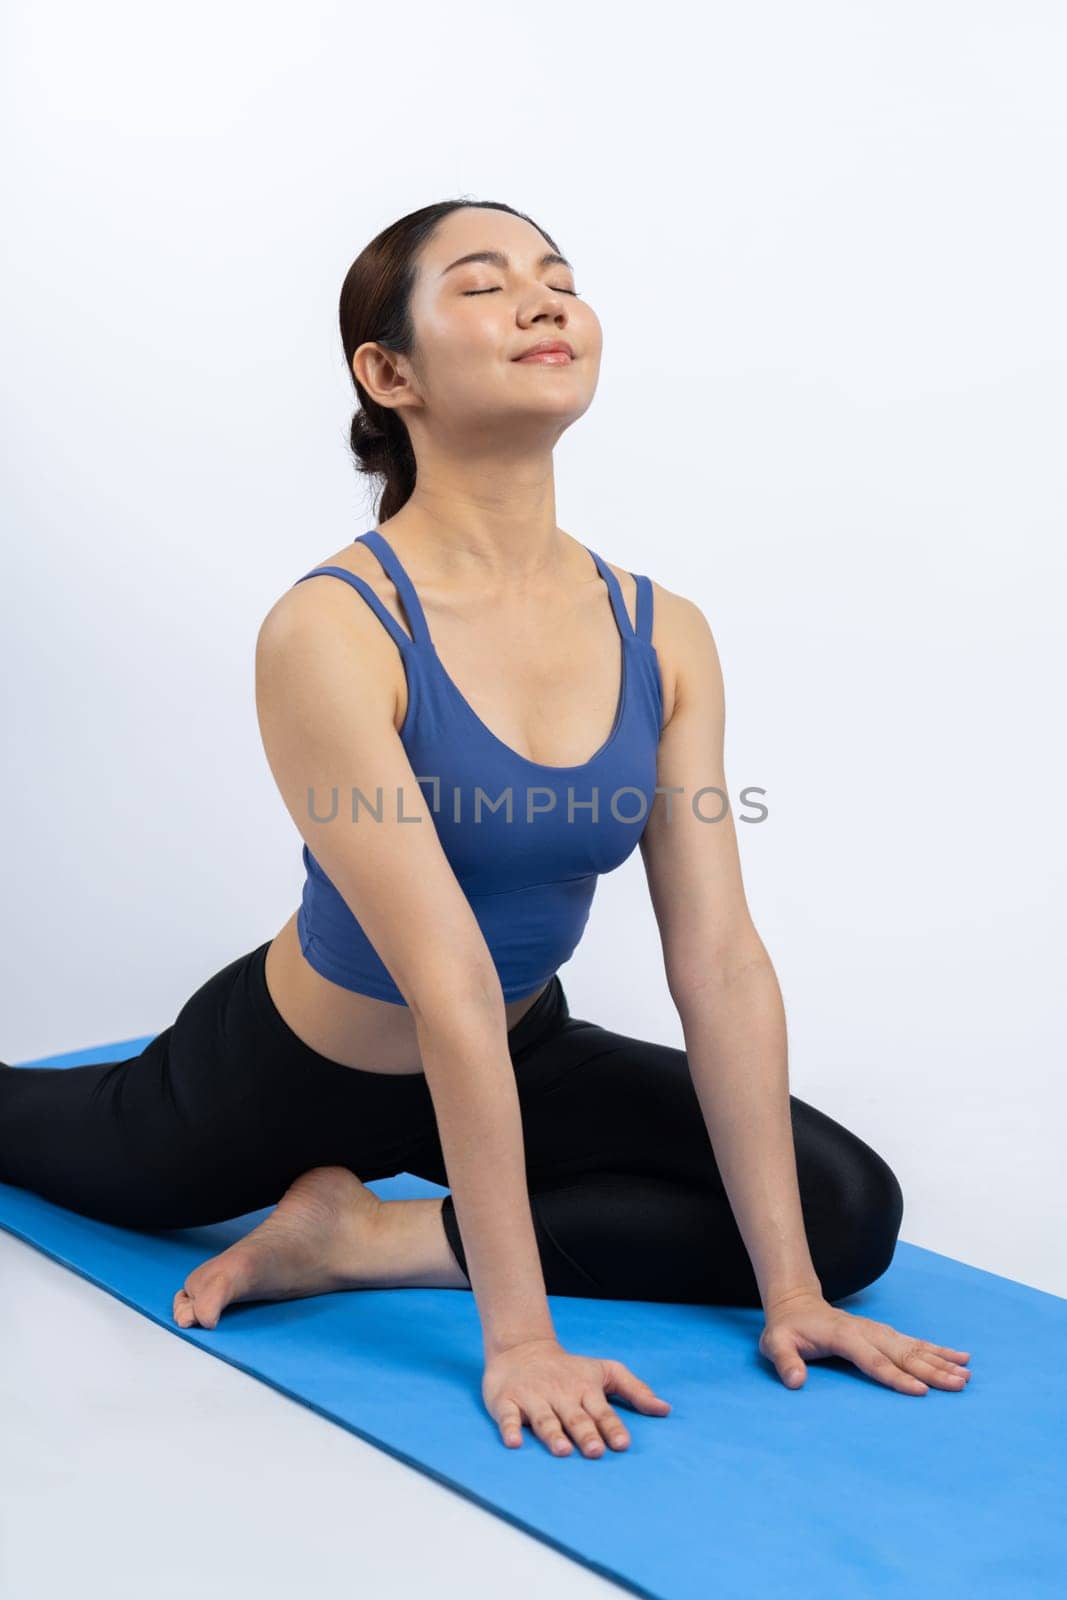 Asian woman in sportswear doing yoga exercise on fitness mat as her workout training routine. Healthy body care and calm meditation in yoga lifestyle in full body shot on isolated background. Vigorous